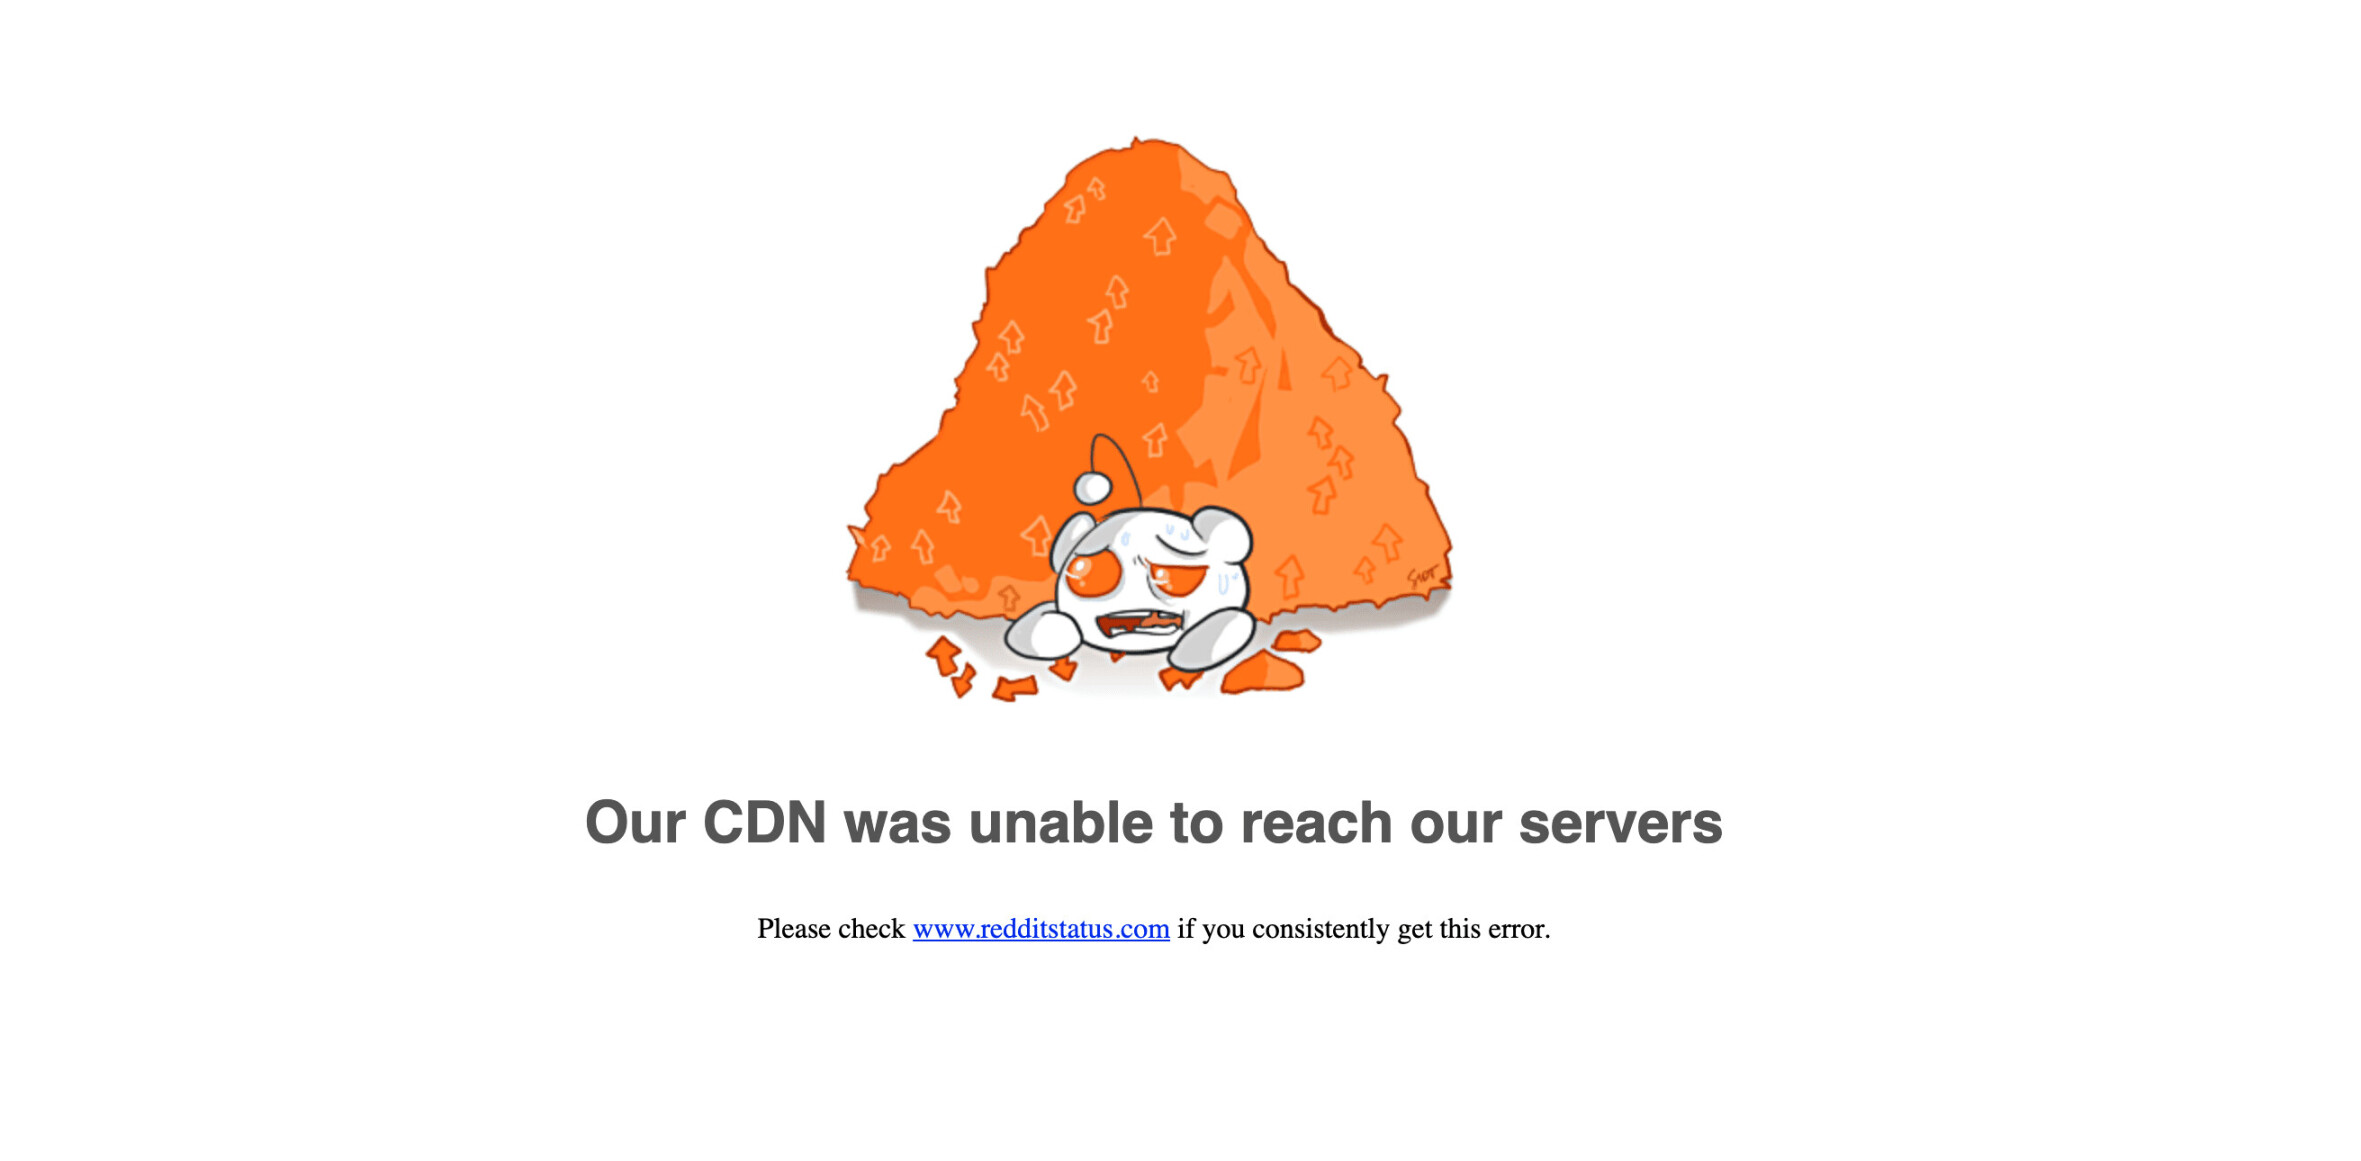 Reddit is down right now [Update: It’s coming back up]